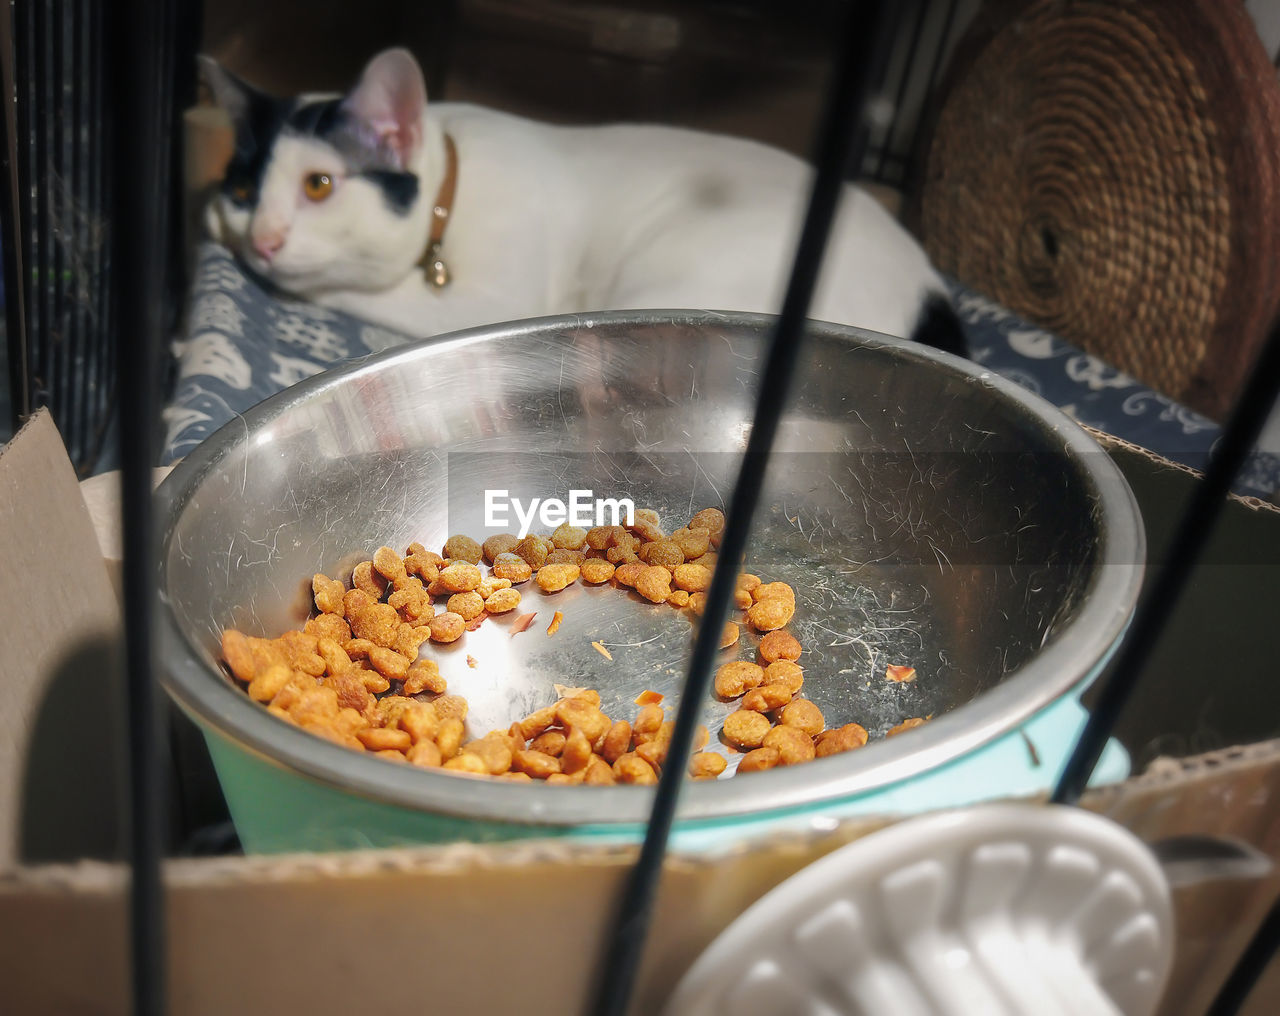 cat, food and drink, food, carnivore, snack, pet, household equipment, domestic animals, indoors, animal, meal, kitchen utensil, wok, animal themes, mammal, dish, domestic room, cooking, appliance, no people, kitchen, baked, domestic cat, freshness, one animal, cooking pan, feline, bowl